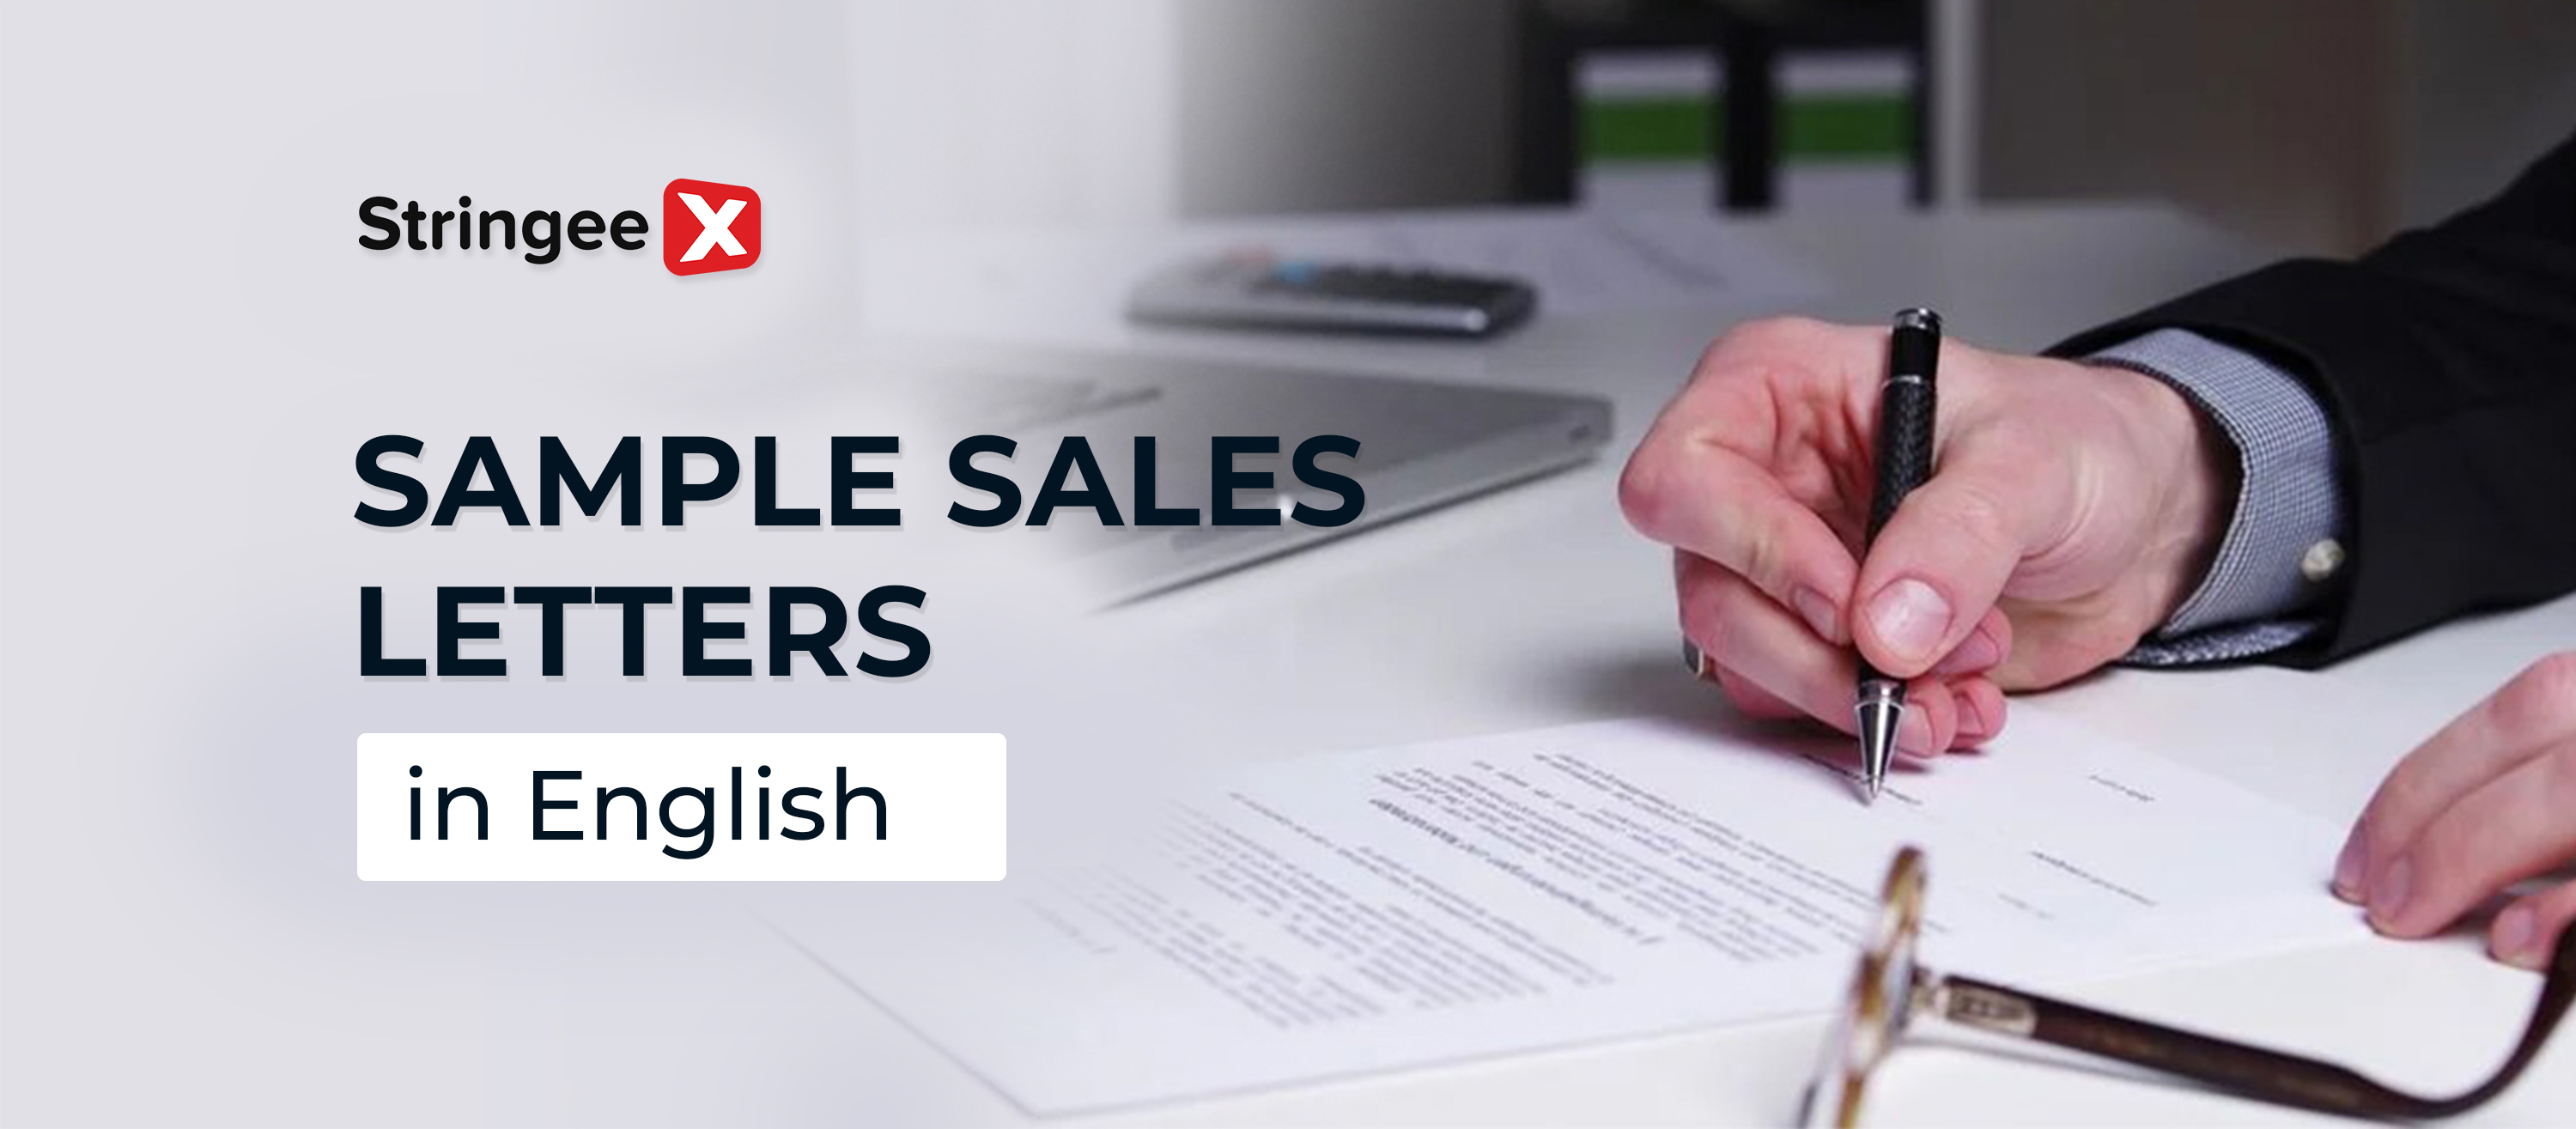 Collection of professional & impressive sample sales letters